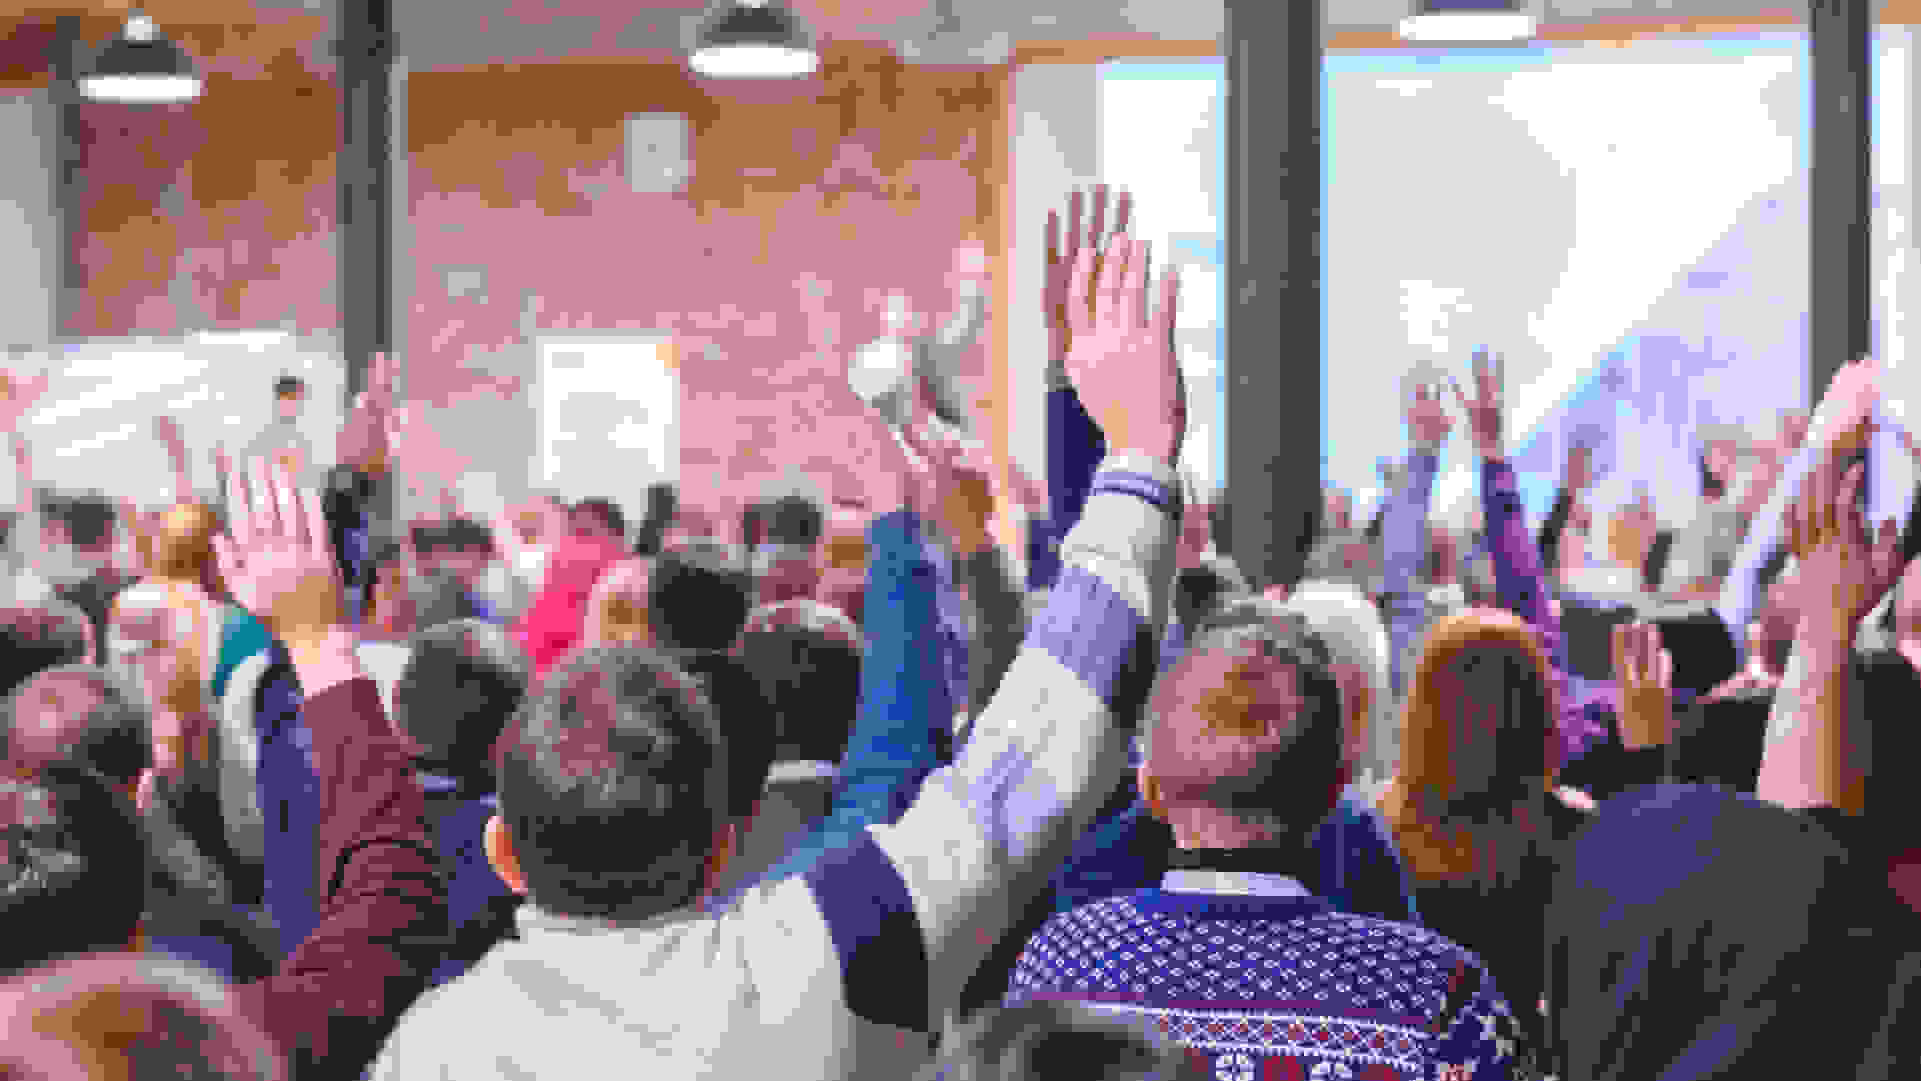 School pupils in an assembly with their hands up.